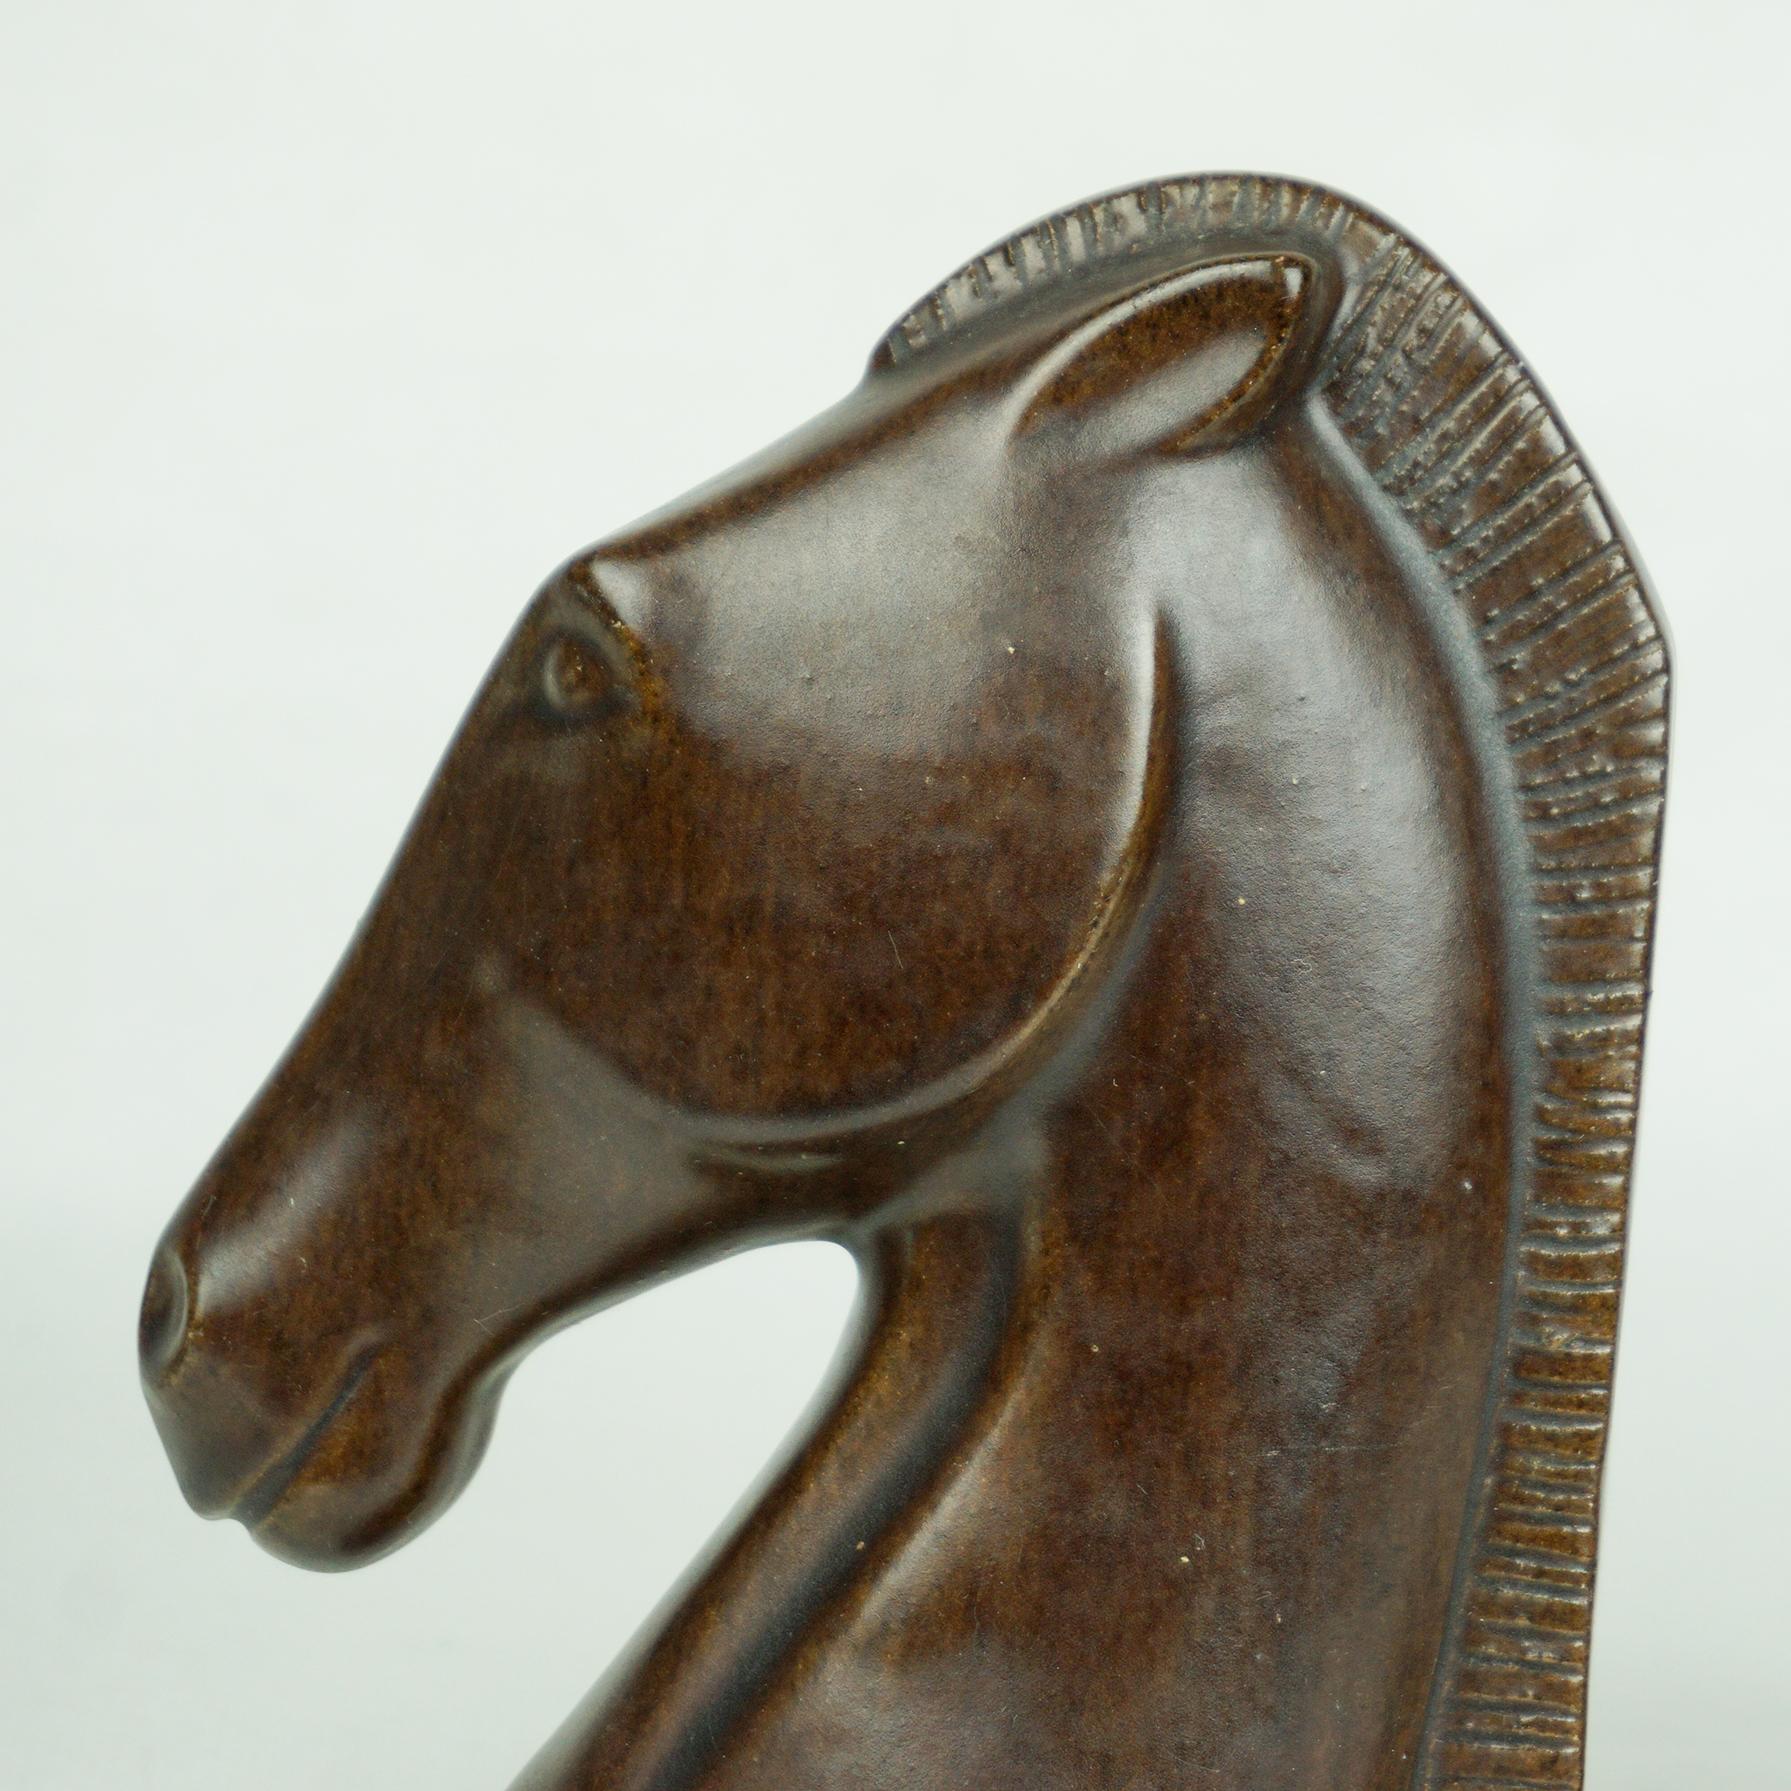 This charming Horse ceramic bookends have been designed and manufactured by the Viennese midcentury artist Leopold Anzengruber. Born in 1912 he founded his own company Anzengruber Keramik Wien in 1949 where he created his rich oeuvre, very well